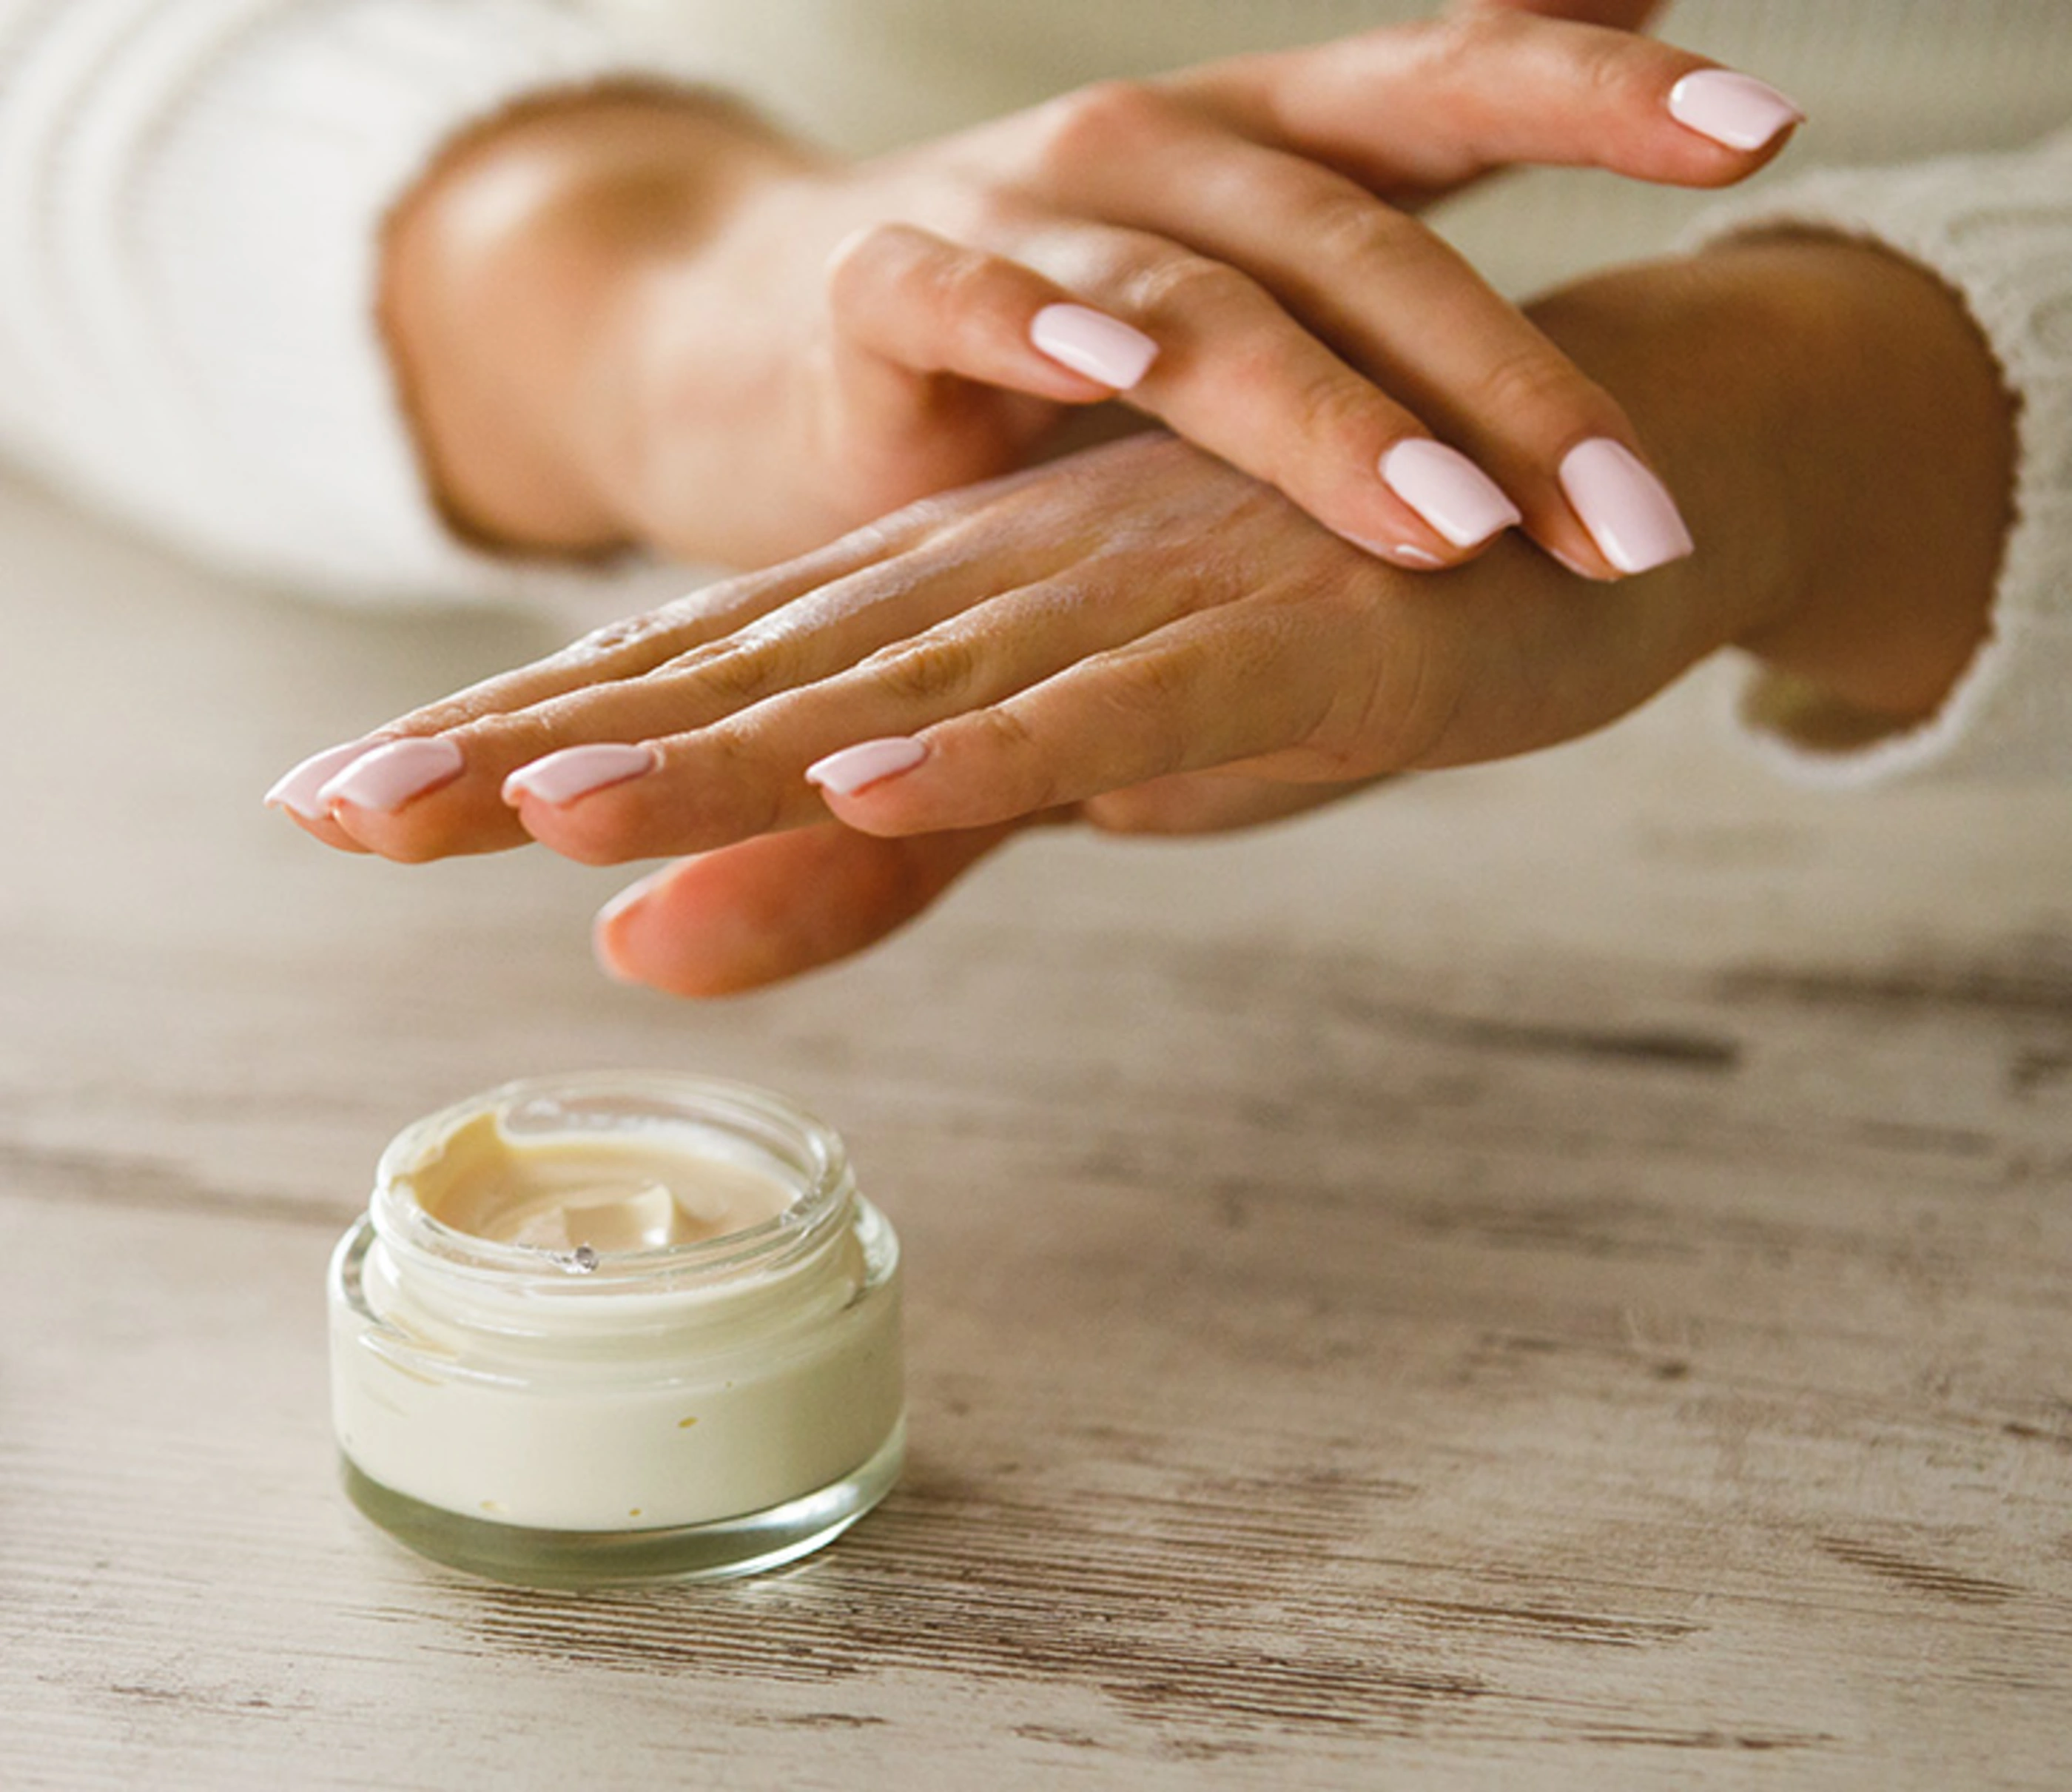 Person moisturizing hands with lotion.